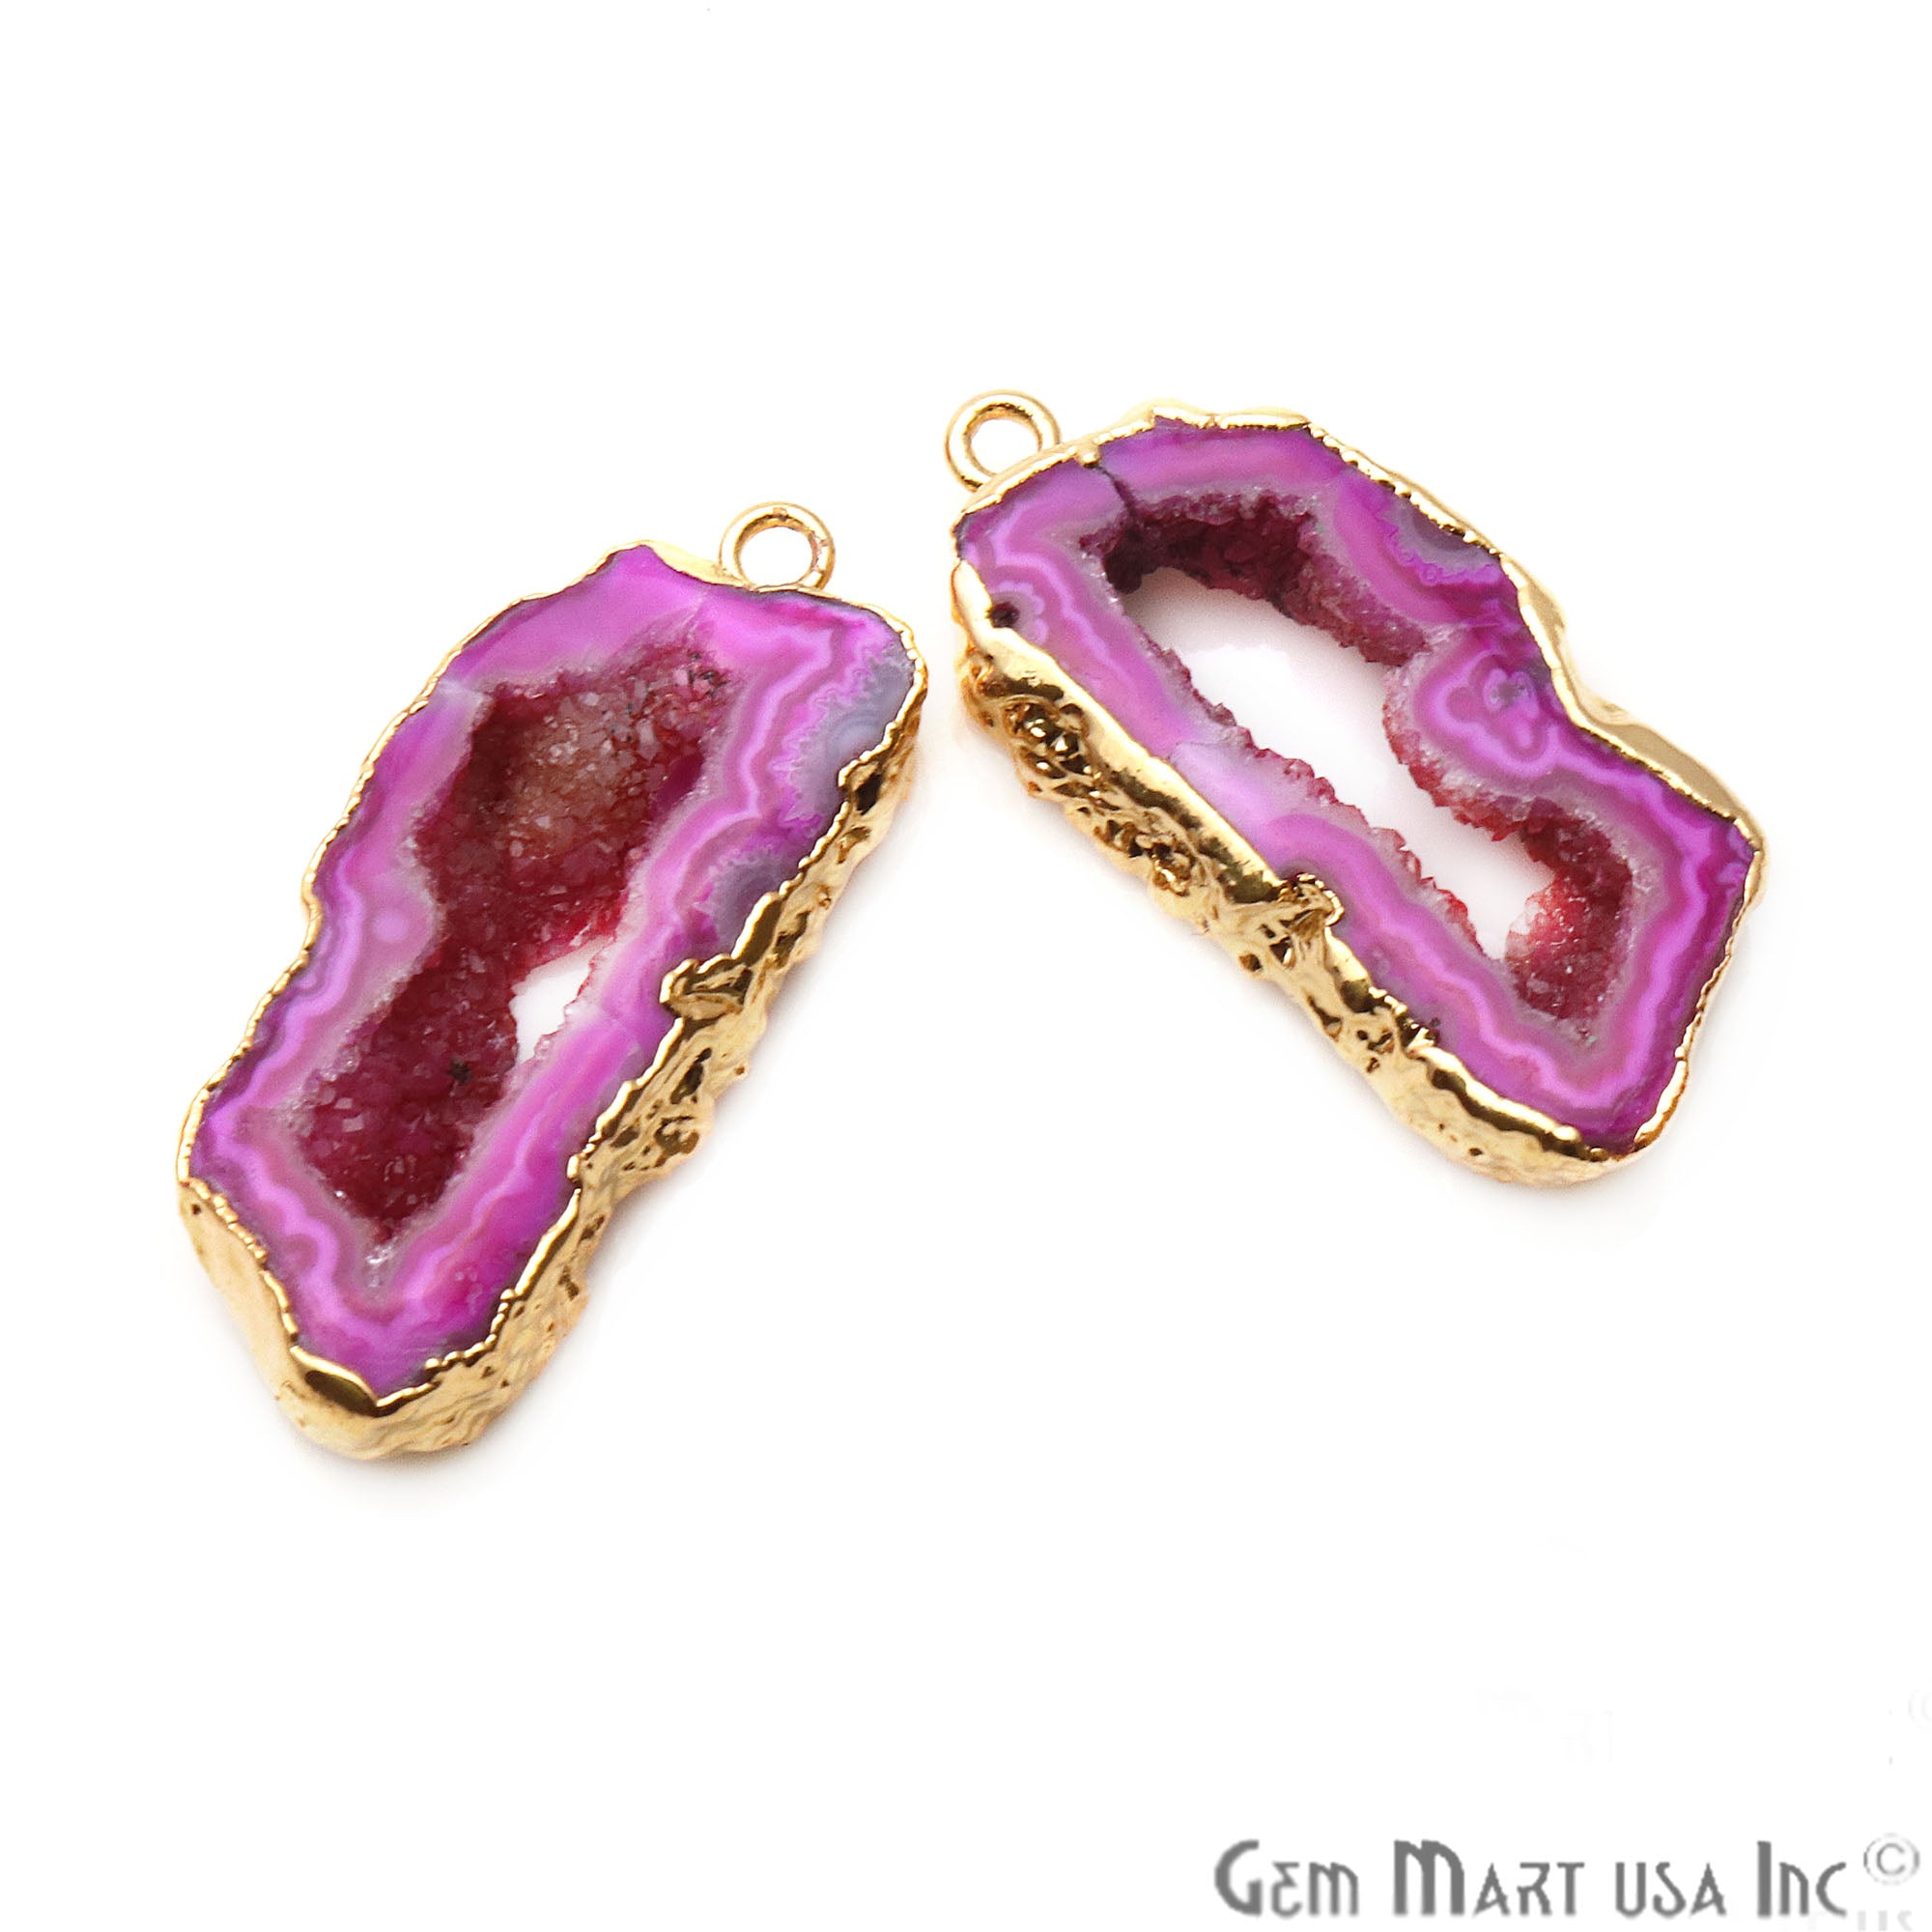 Agate Slice 16x33mm Organic Gold Electroplated Gemstone Earring Connector 1 Pair - GemMartUSA